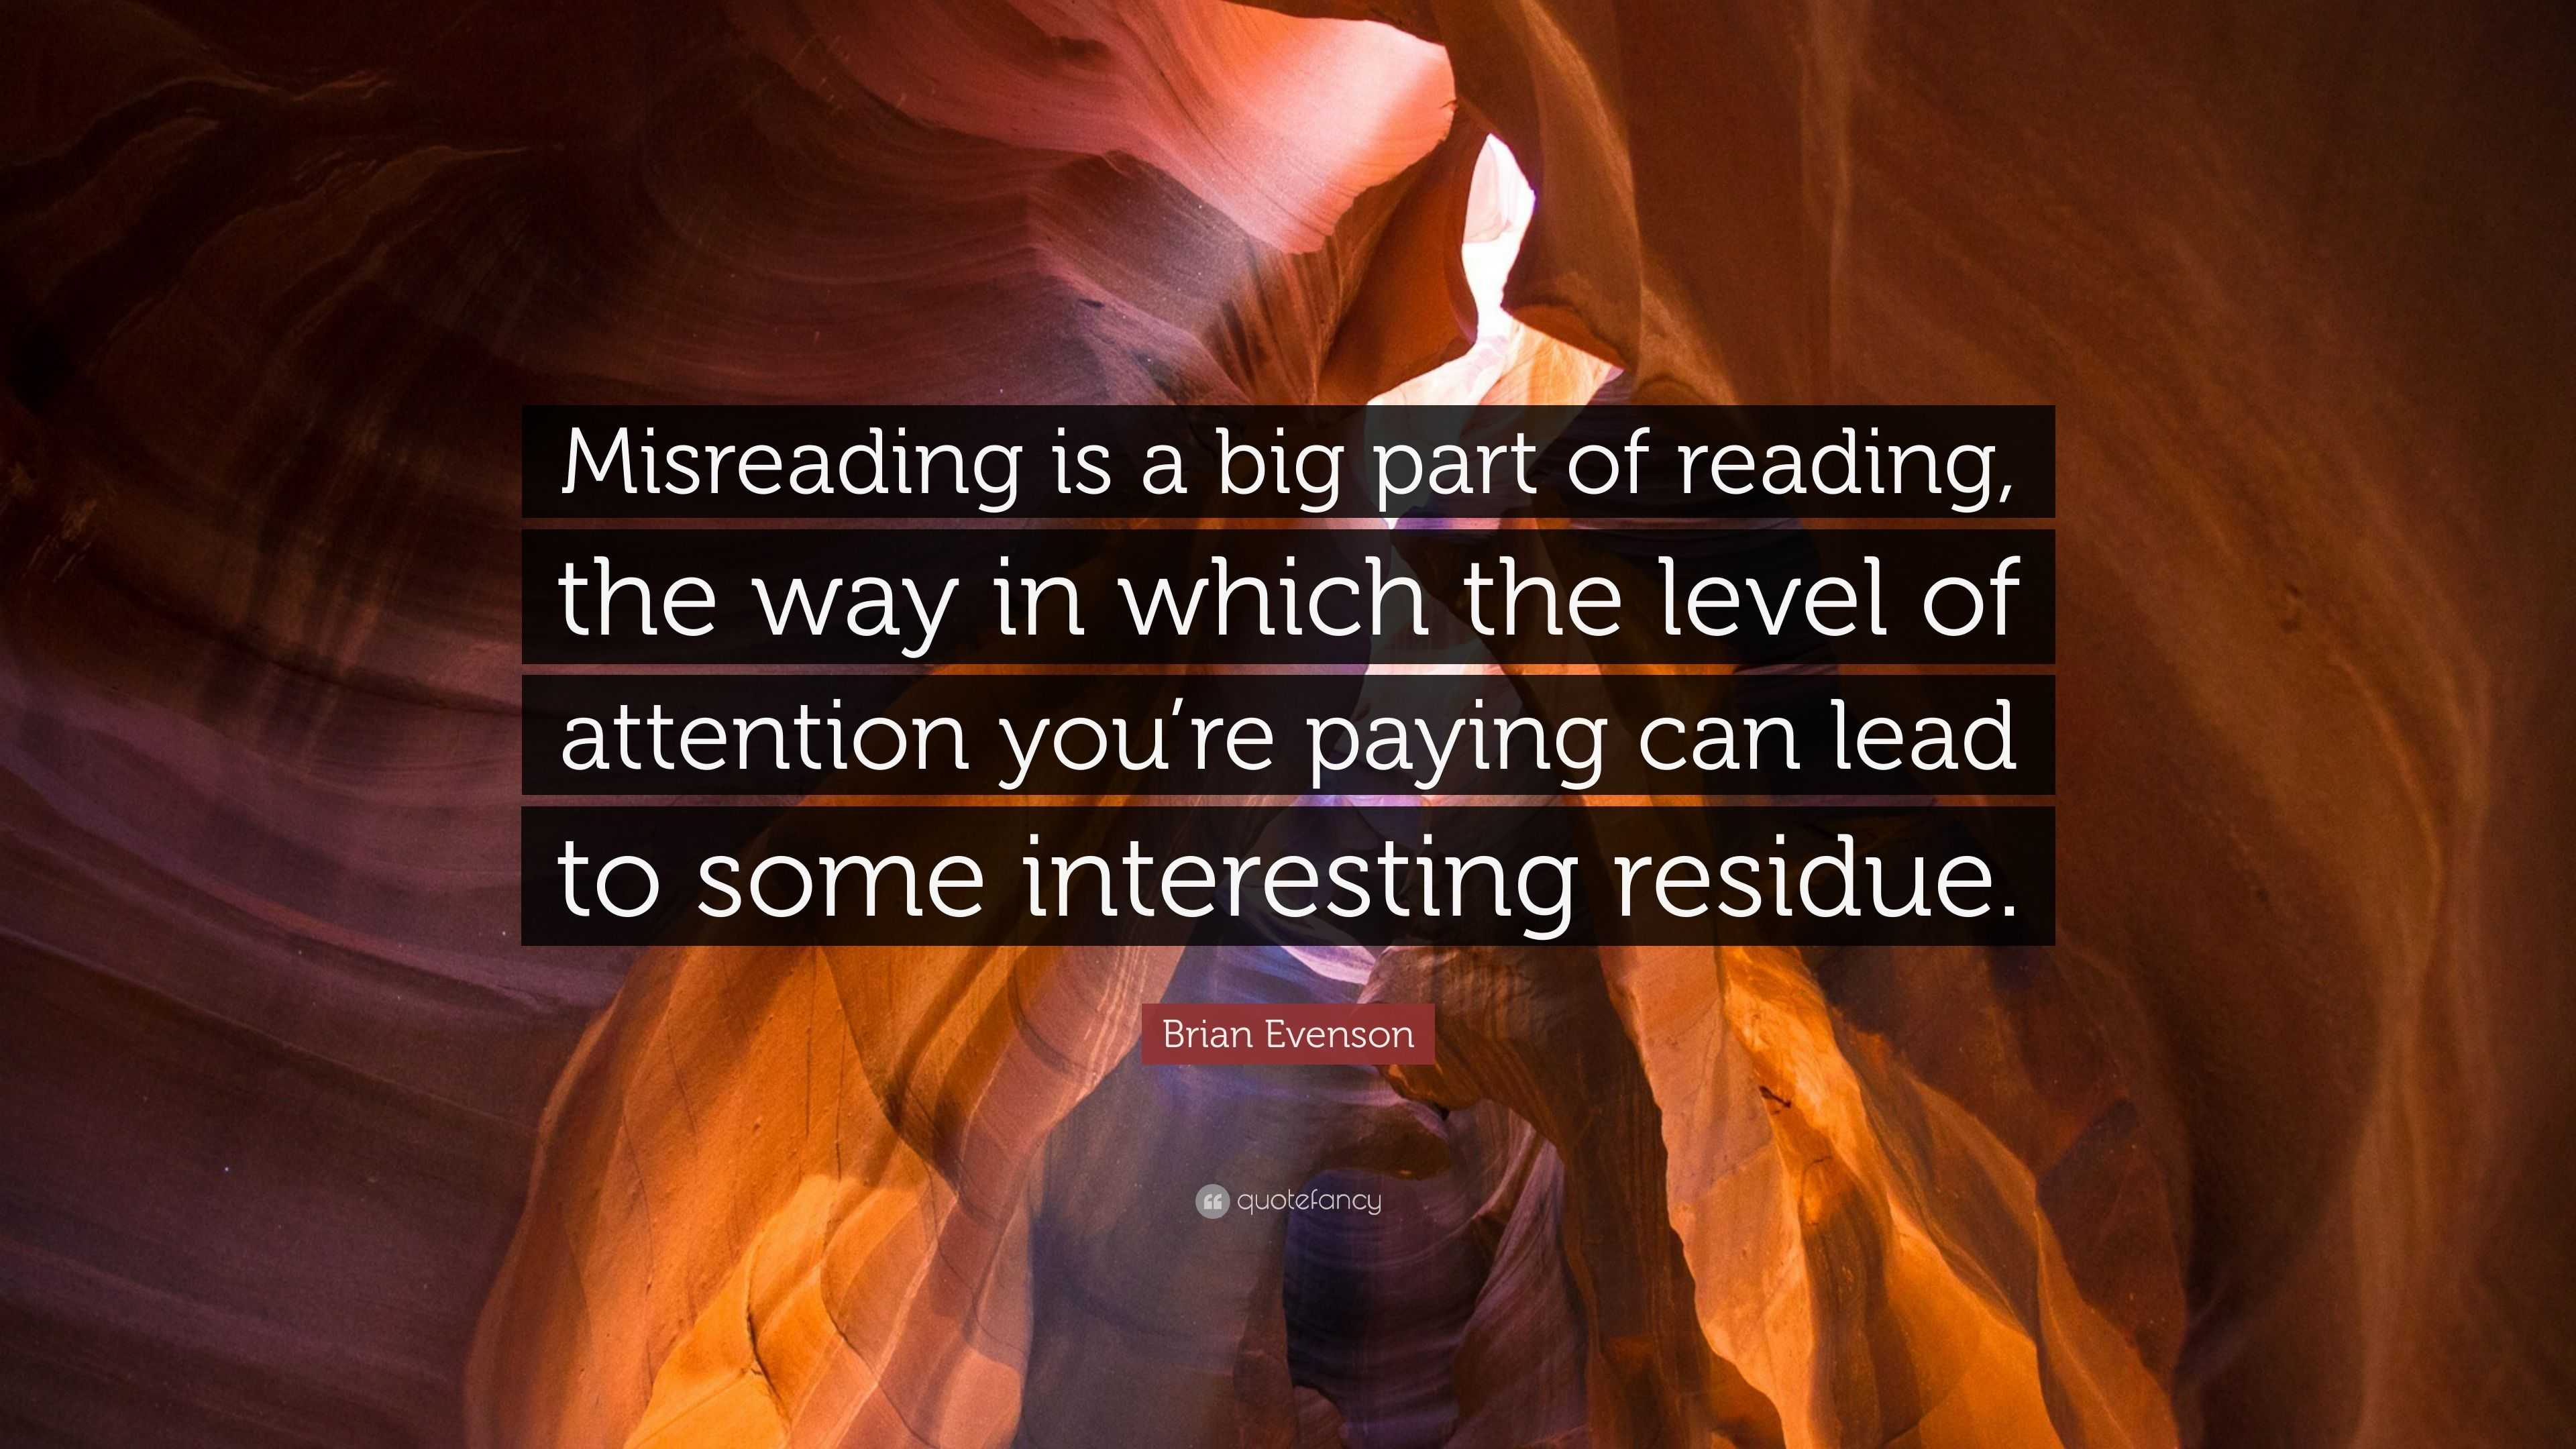 Brian Evenson Quote: “Misreading is a big part of reading, the way in ...